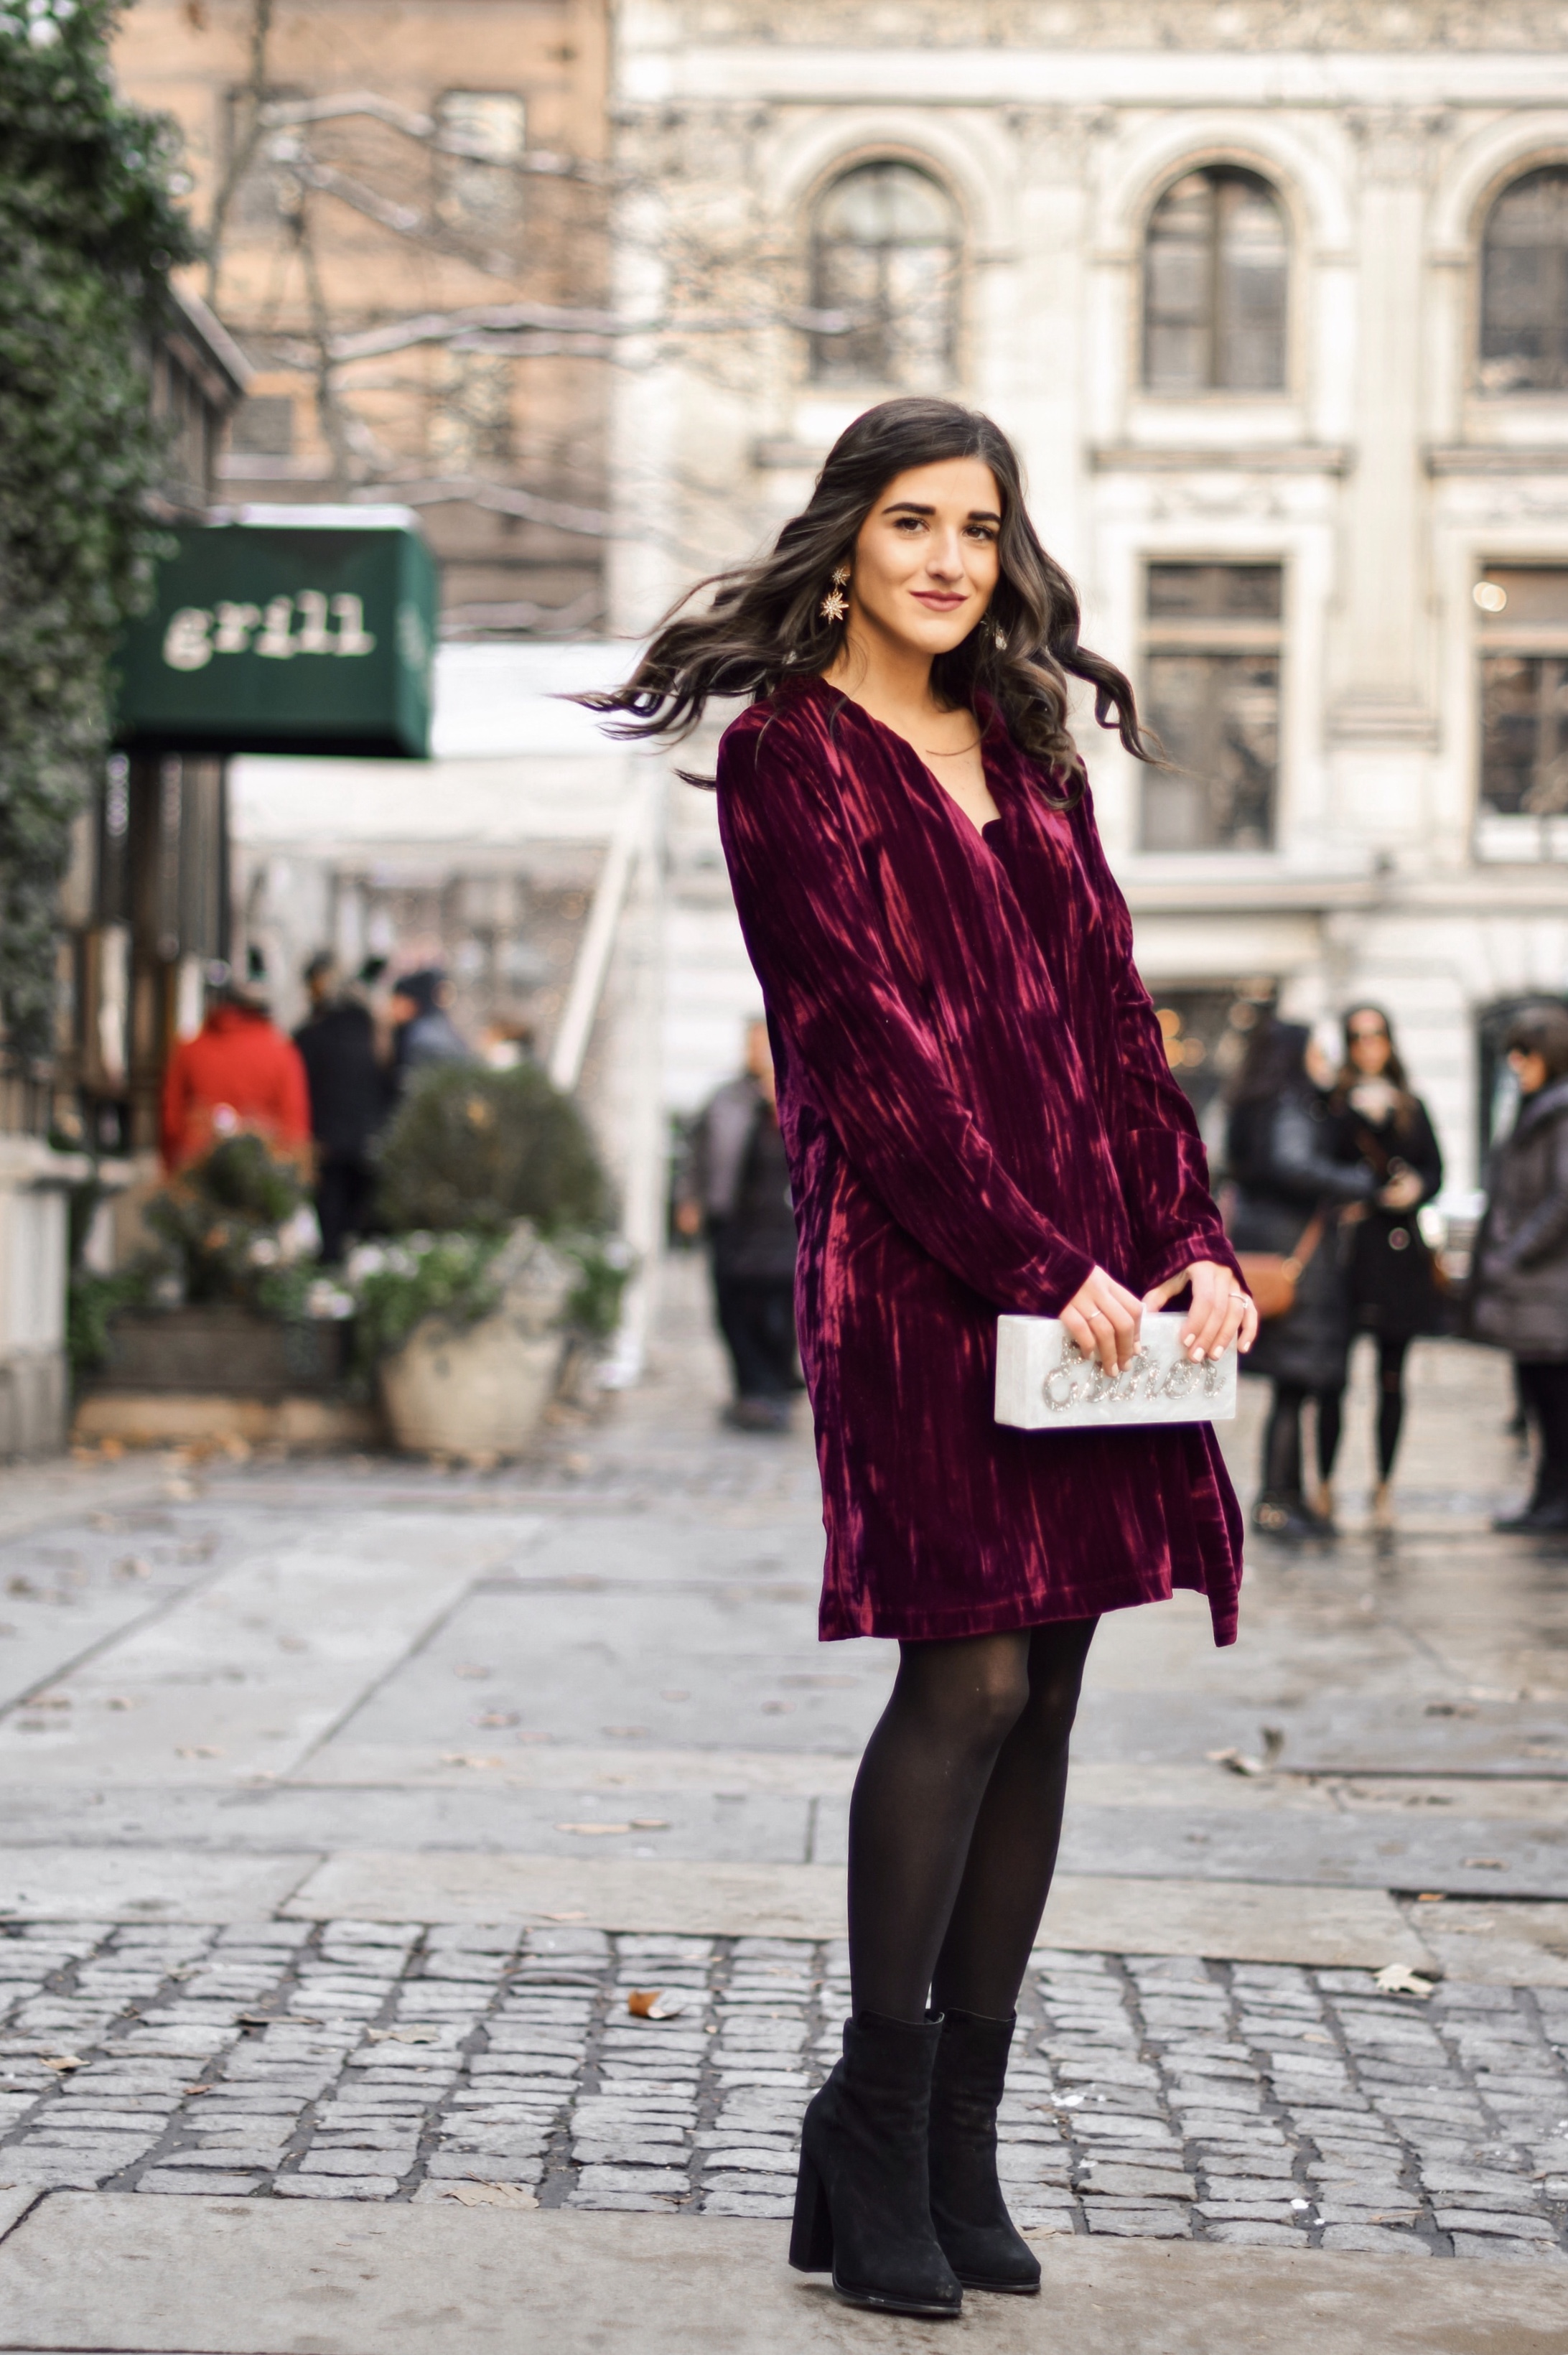 17 Tips On Building An Instagram Following Maroon Velvet Dress Black Booties Esther Santer Fashion Blog NYC Street Style Blogger Outfit OOTD Trendy Zara Online Shopping Winter Monogram Box Bag Clutch Shoes M4D3 Wavy Hair Hue Tights Wear Simple Classic.jpg